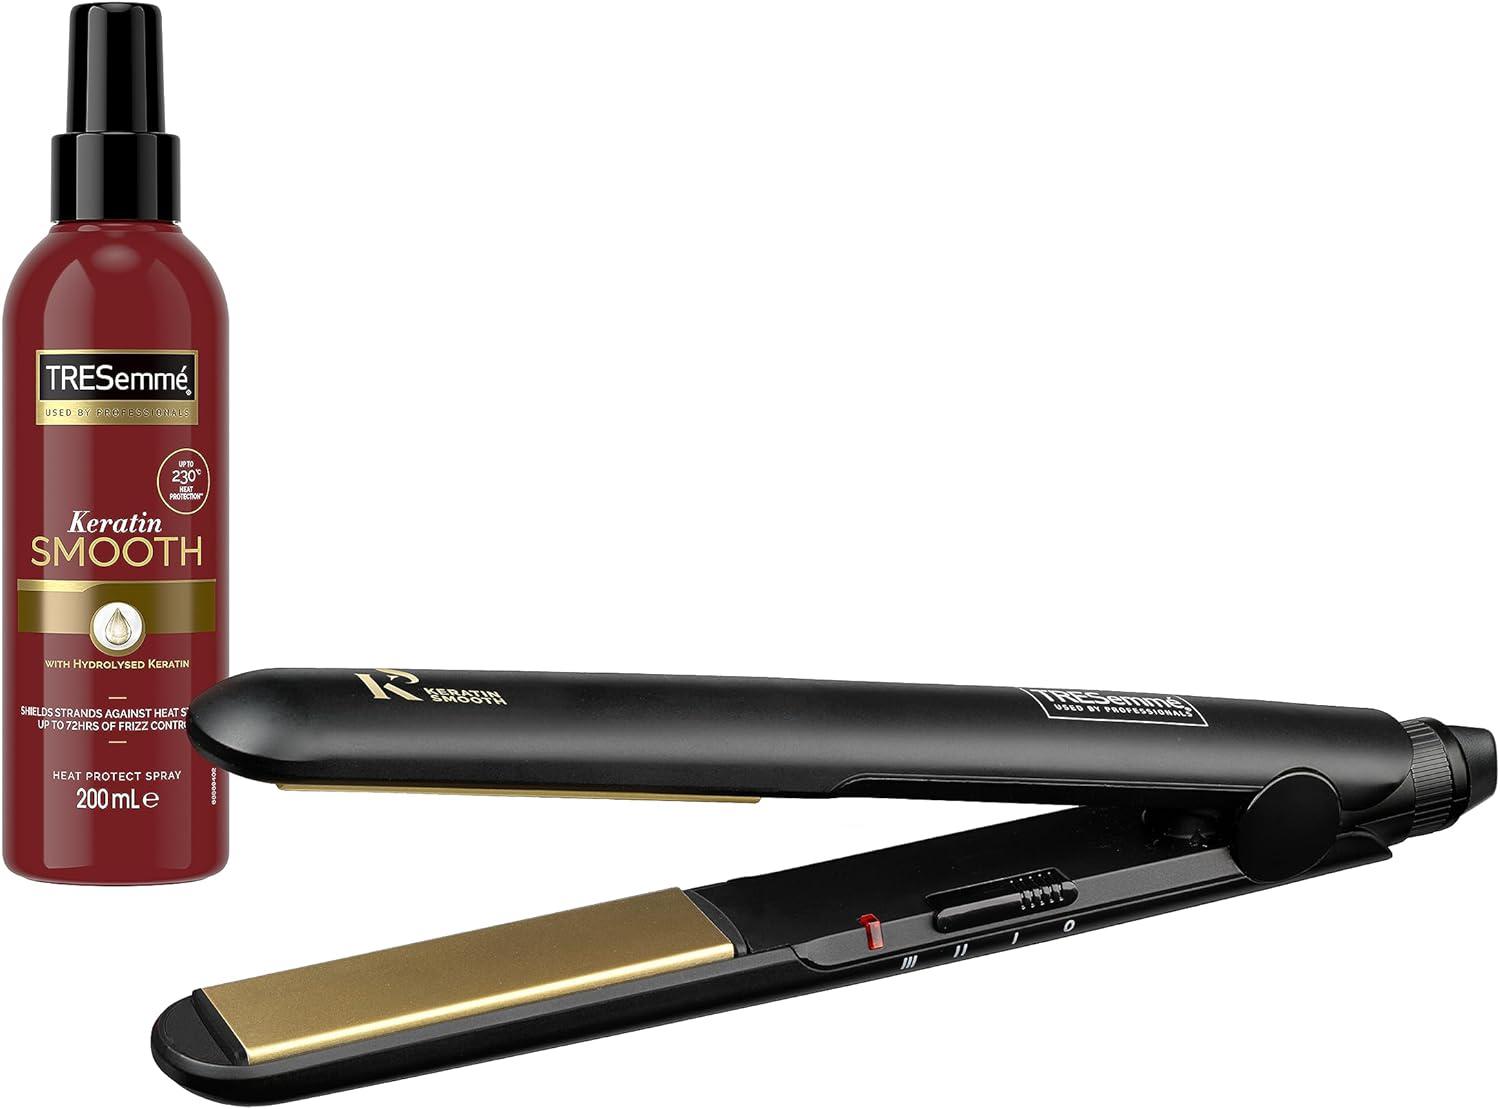 TRESemme Keratin Smooth Control Number 230 Straightener, Black